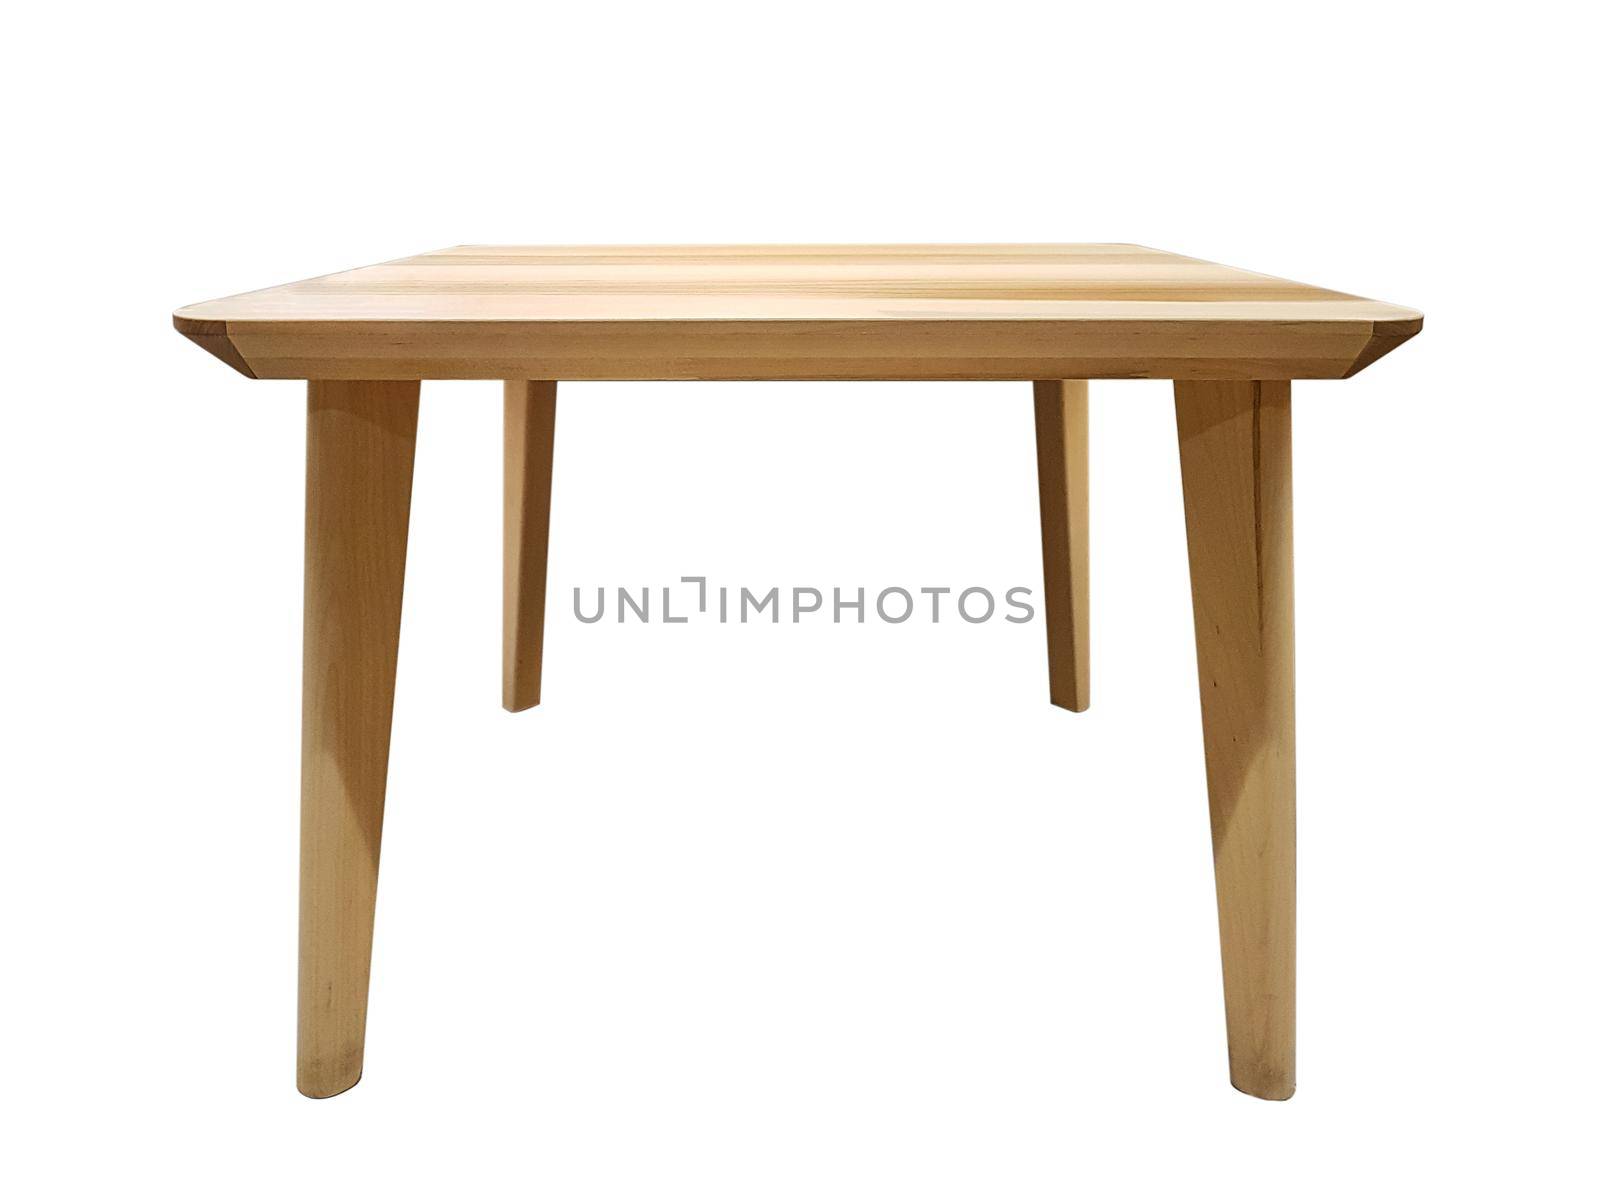 Modern wooden table by wdnet_studio